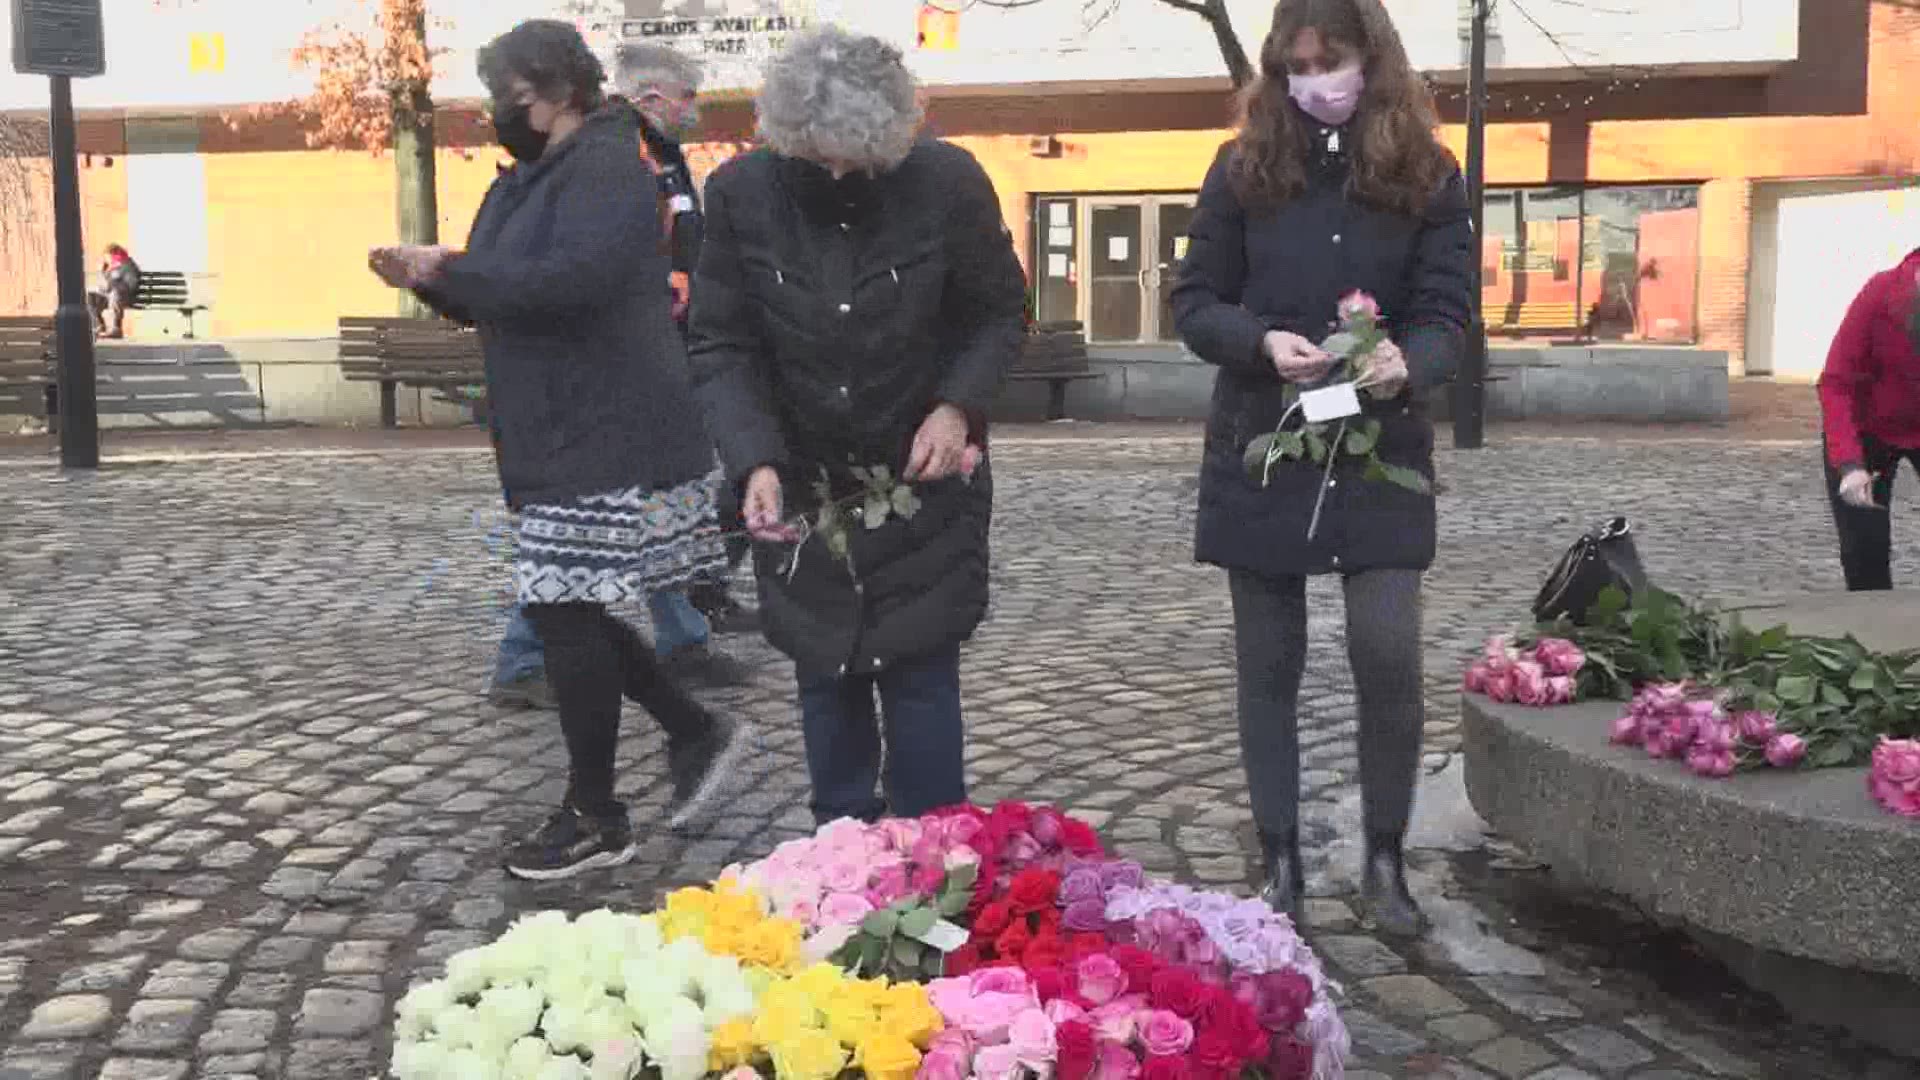 'Floral Heart Project' brings National Day of Mourning to Maine